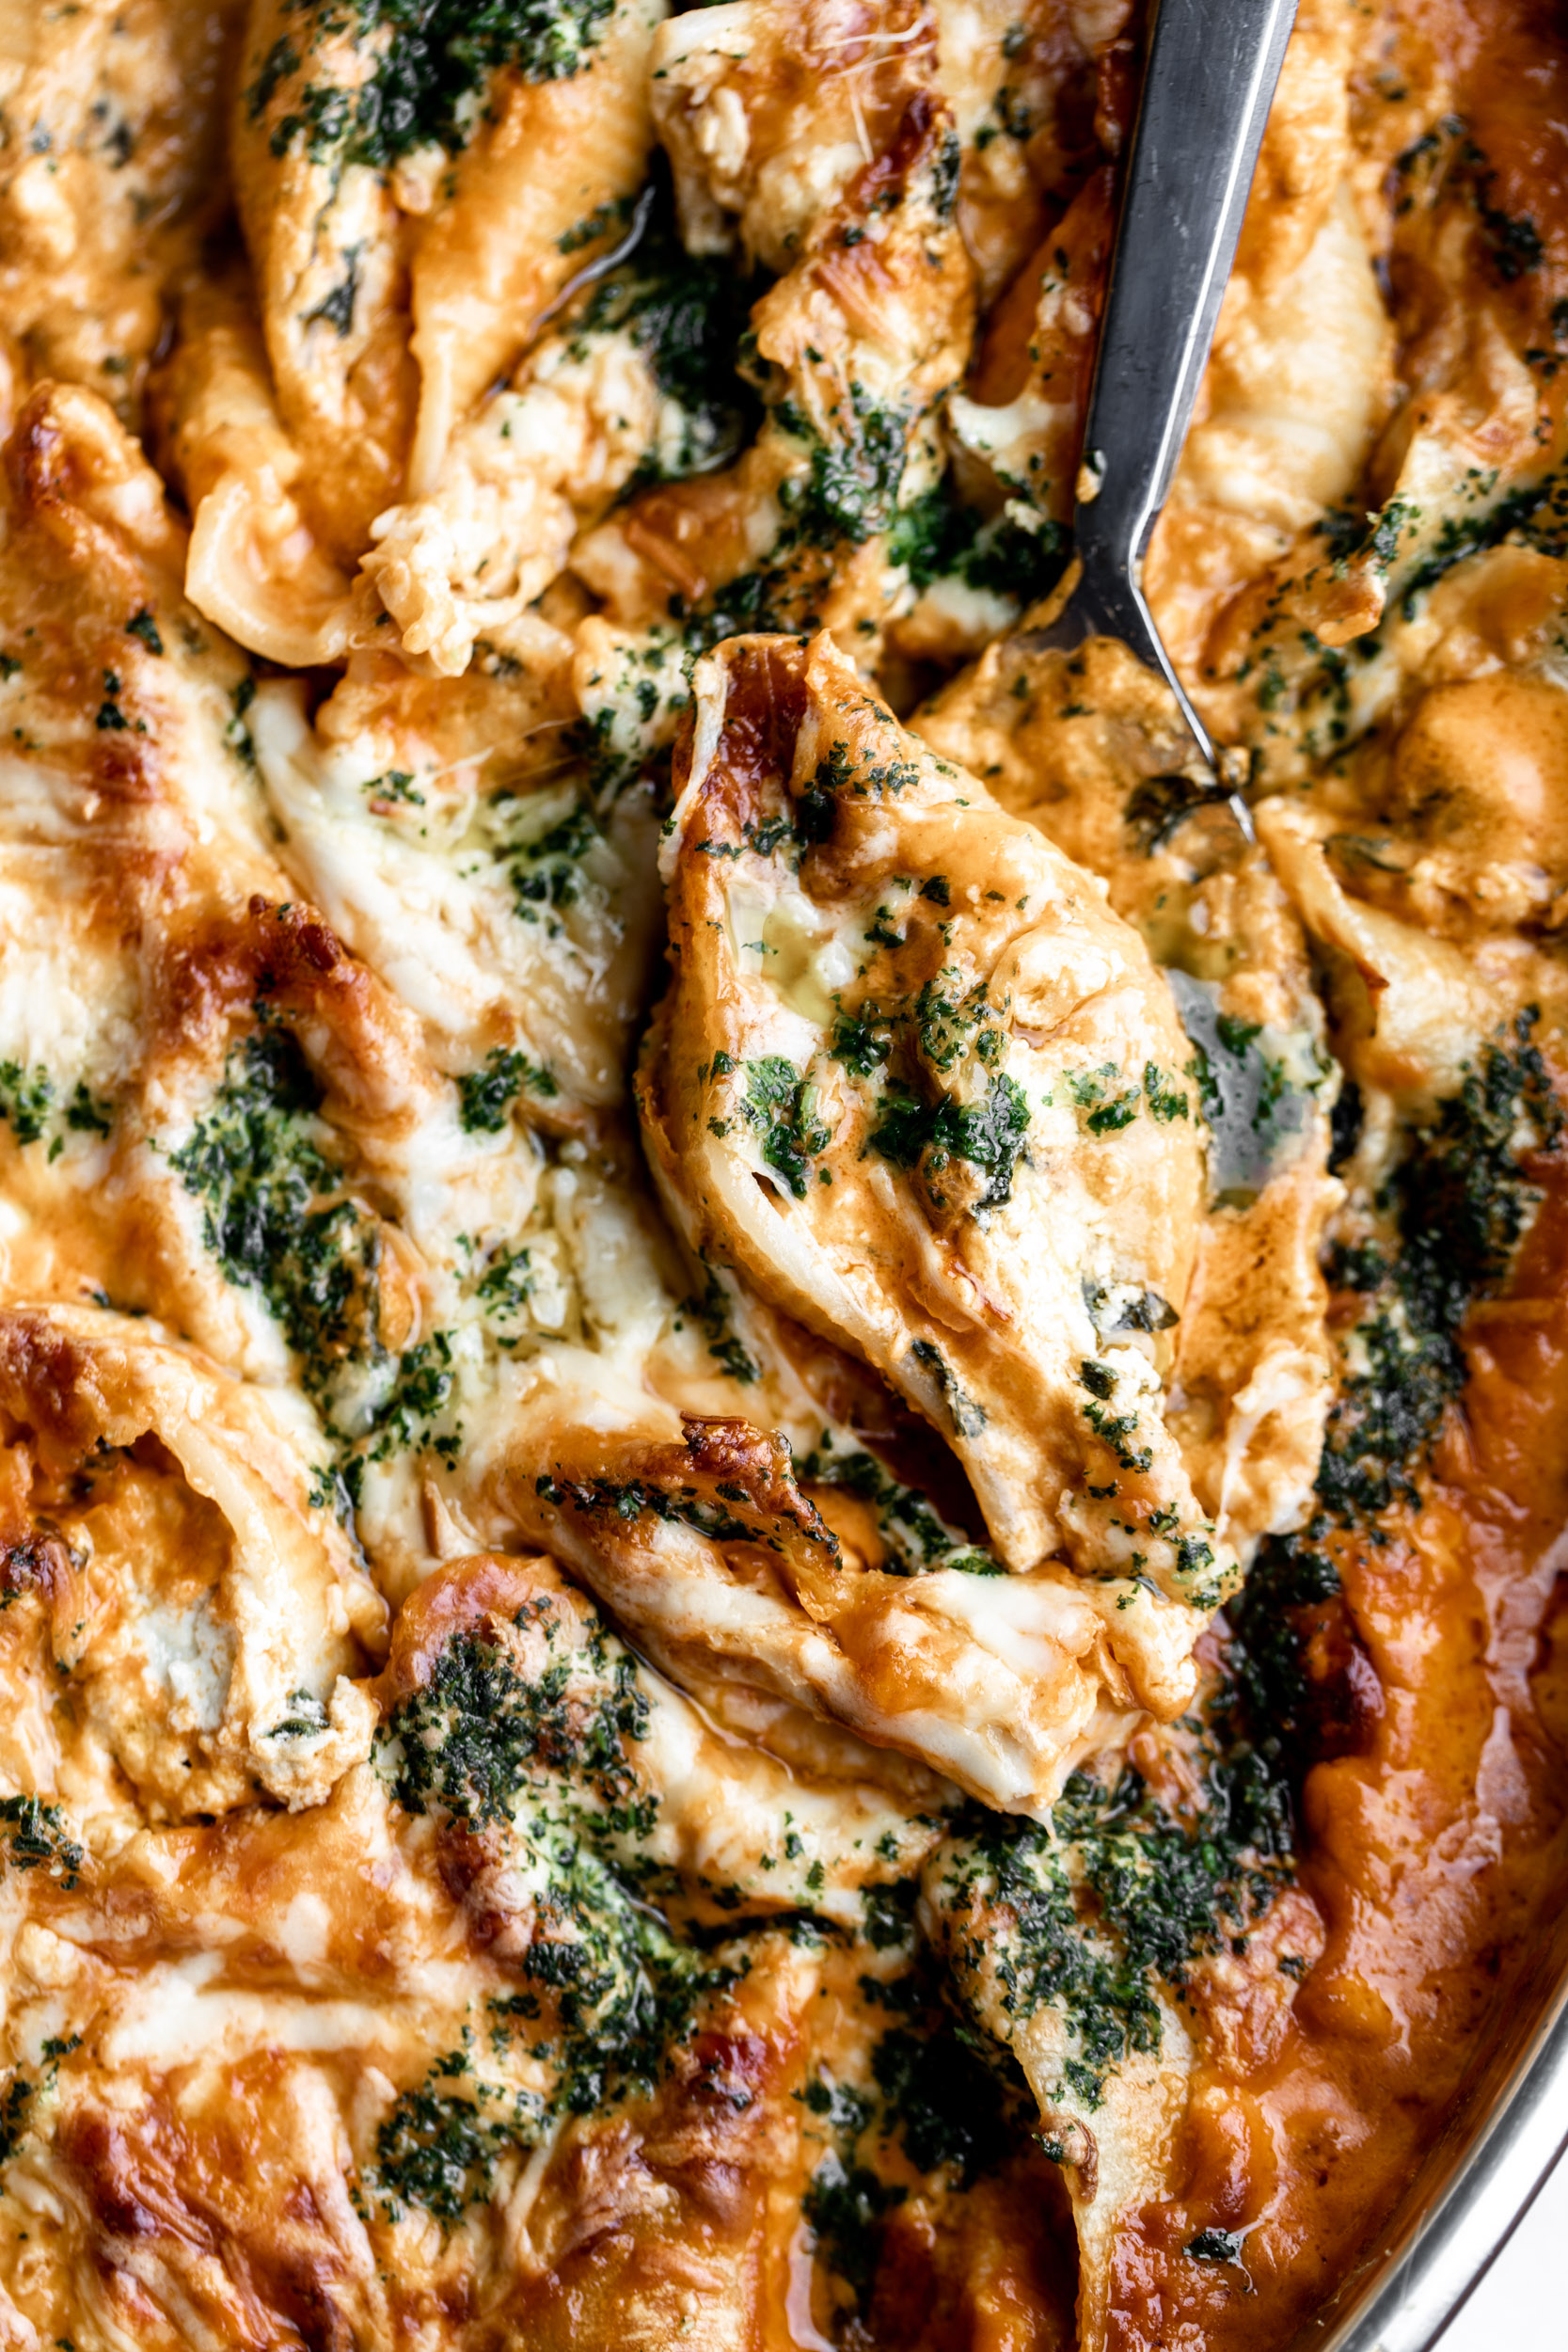 Baked Stuffed Shells in Vodka Sauce with Pesto Oil and Smoked Mozzarella